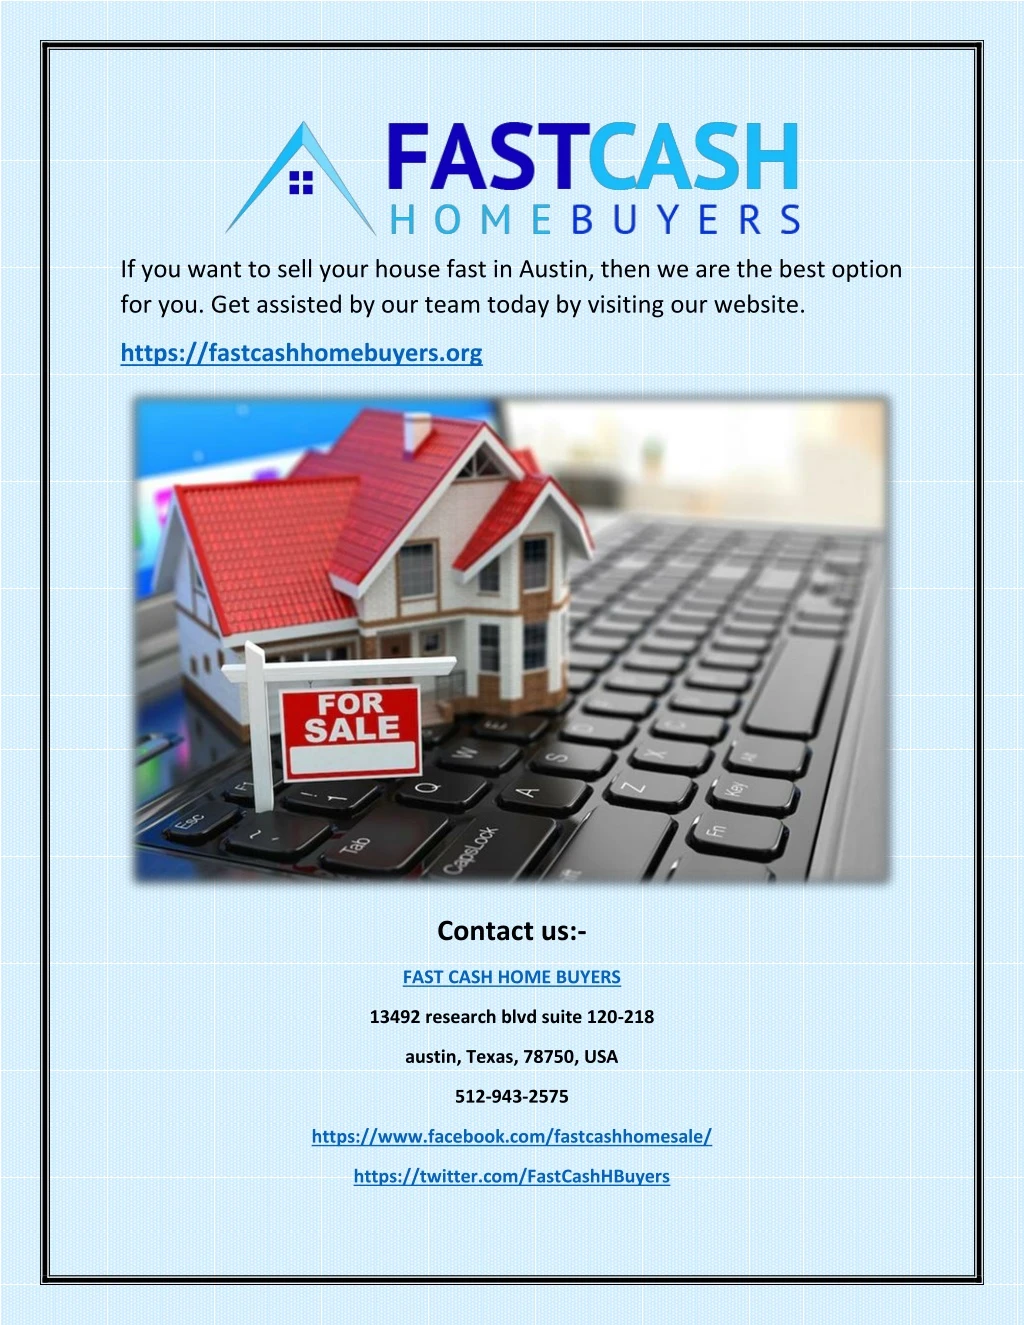 if you want to sell your house fast in austin